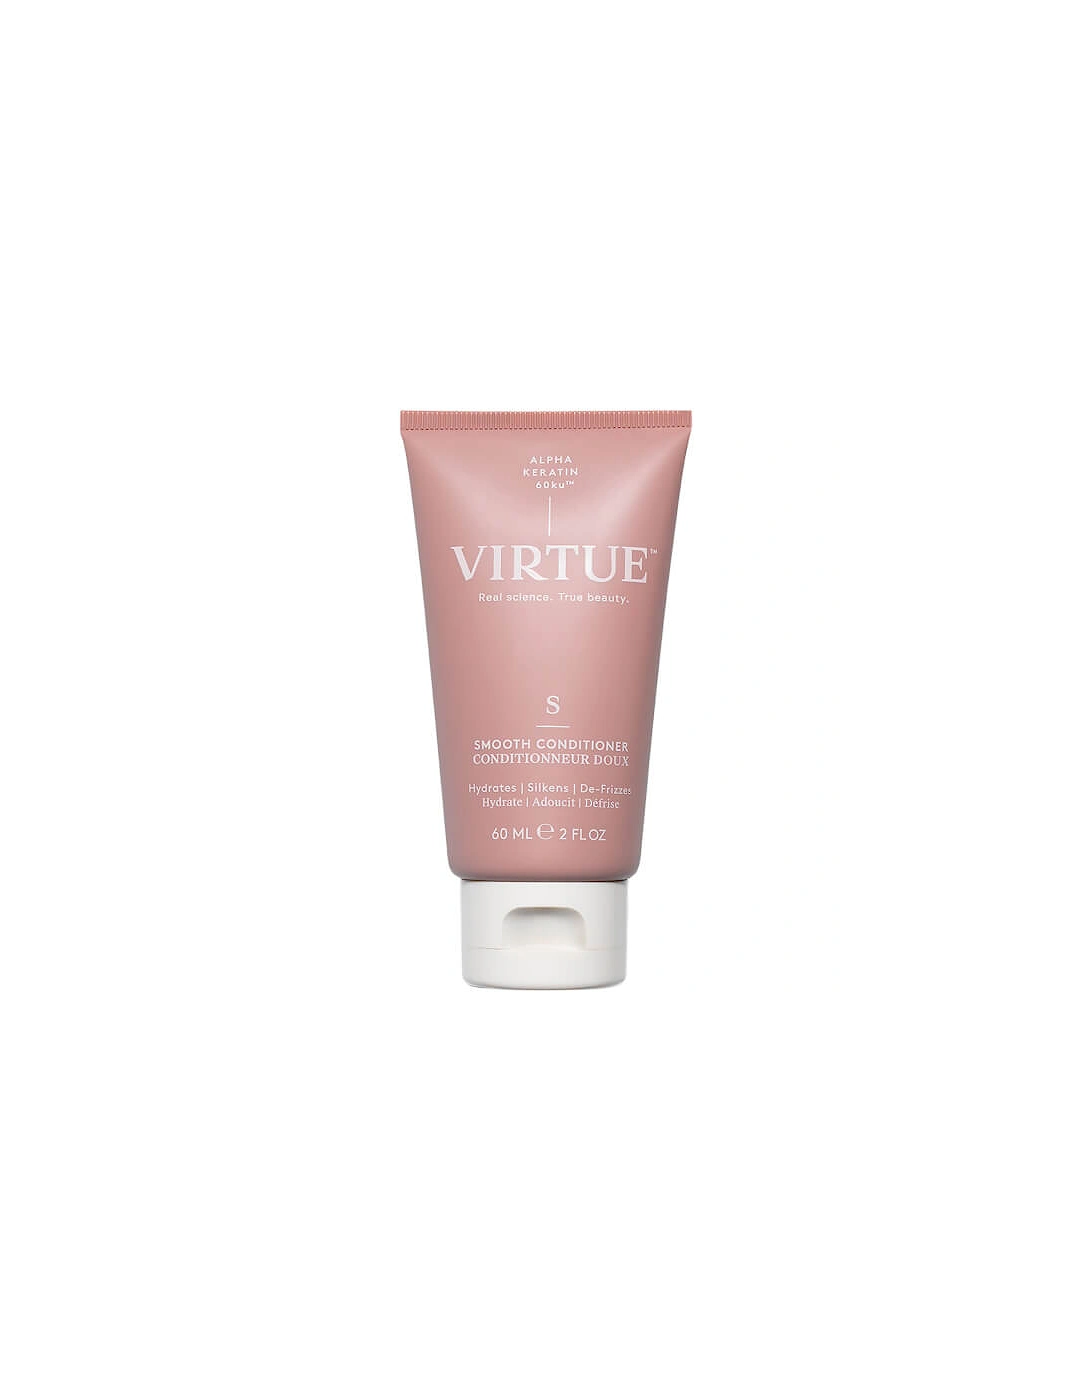 Smooth Conditioner Travel Size 57ml - VIRTUE, 2 of 1